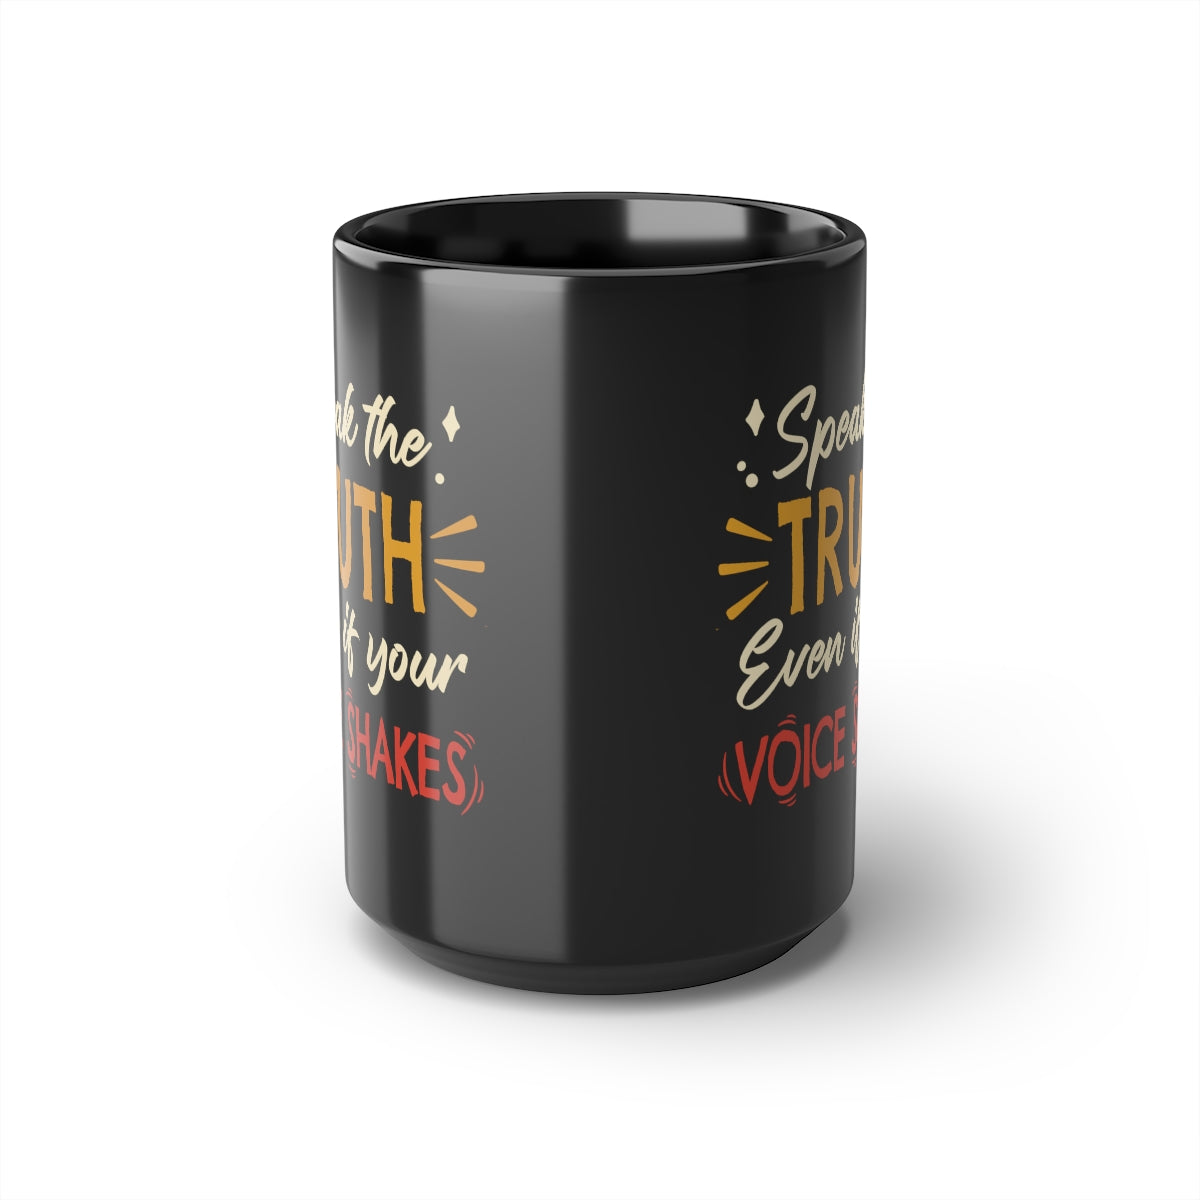 Speak The Truth Even If Your Voice Shakes | 15oz Black Mug - Rise of The New Media